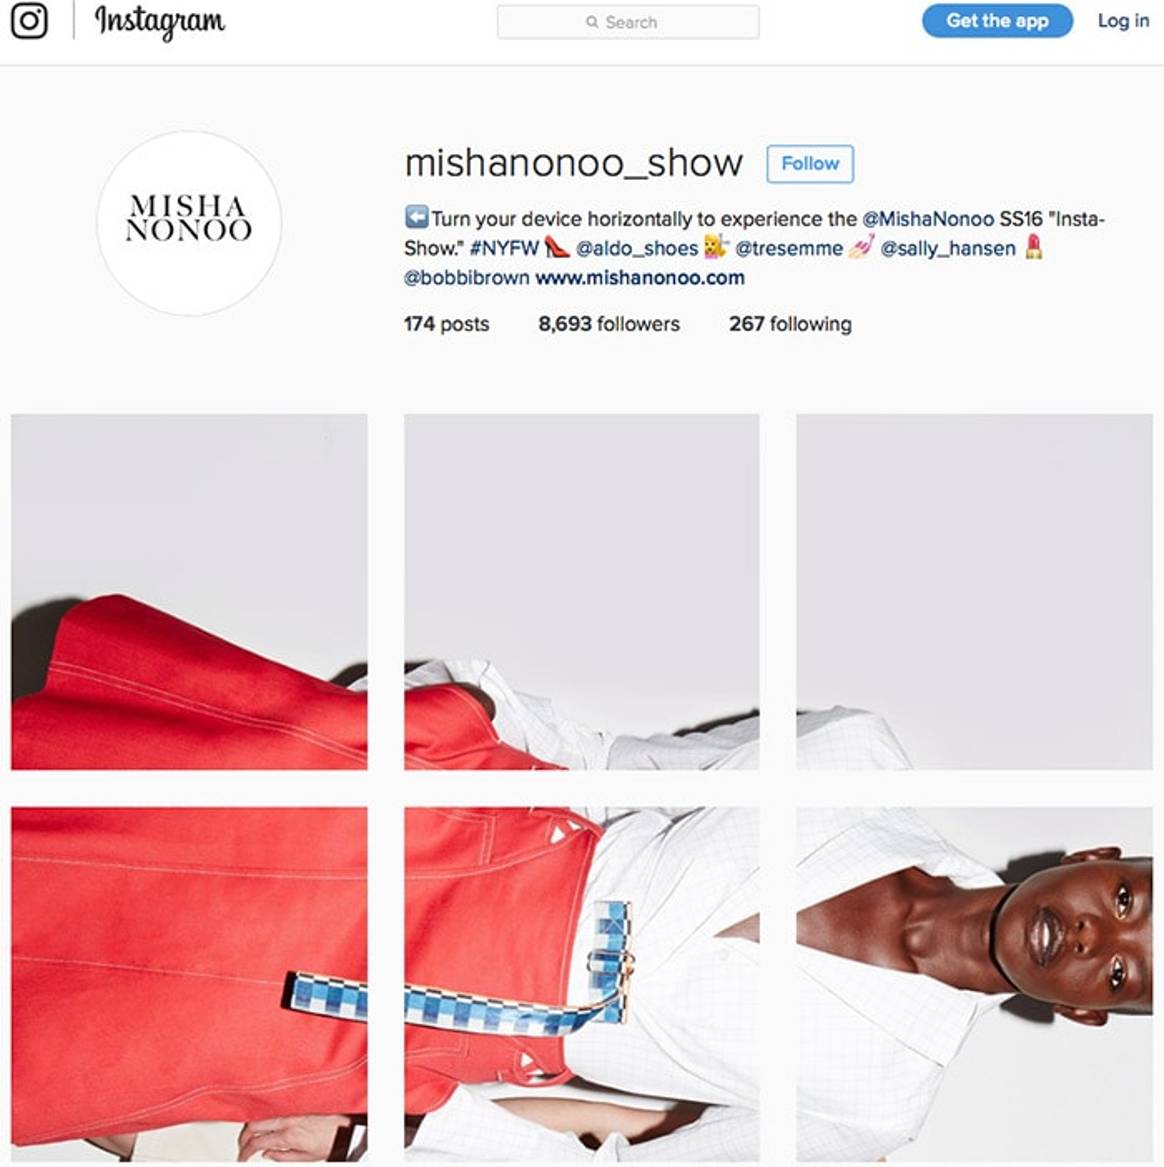 Image power: fashion in the age of Instagram